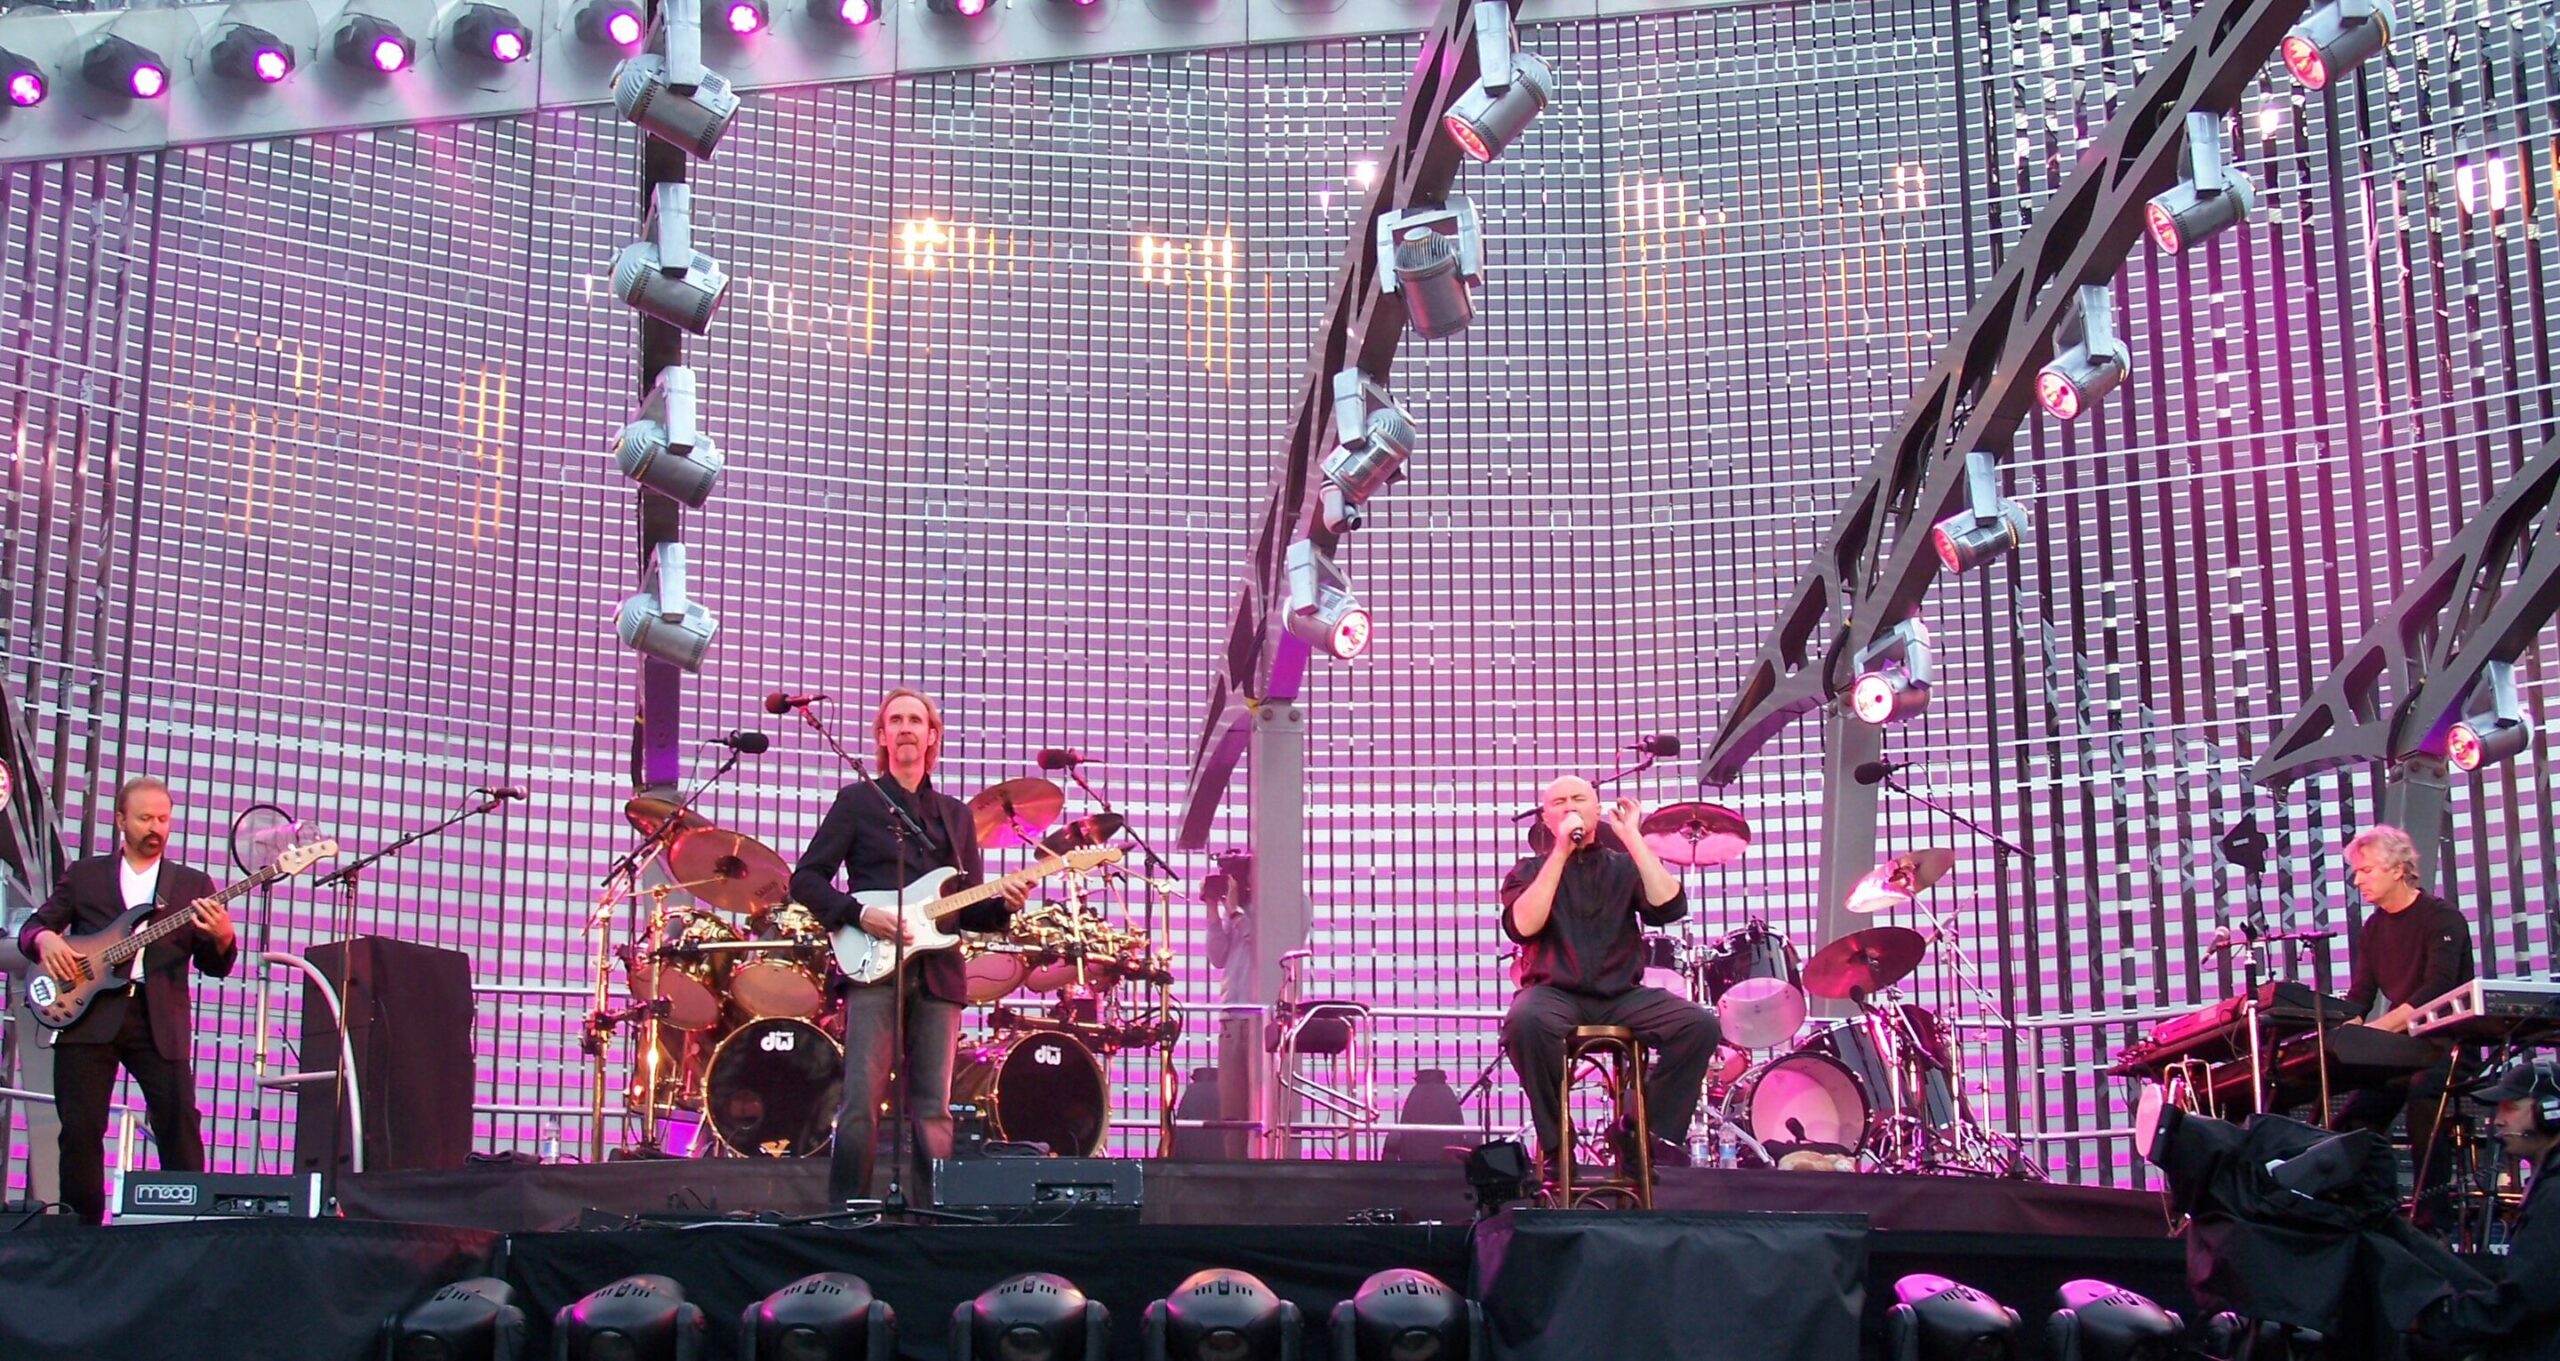 Genesis performing at Old Trafford, Manchester in 2007